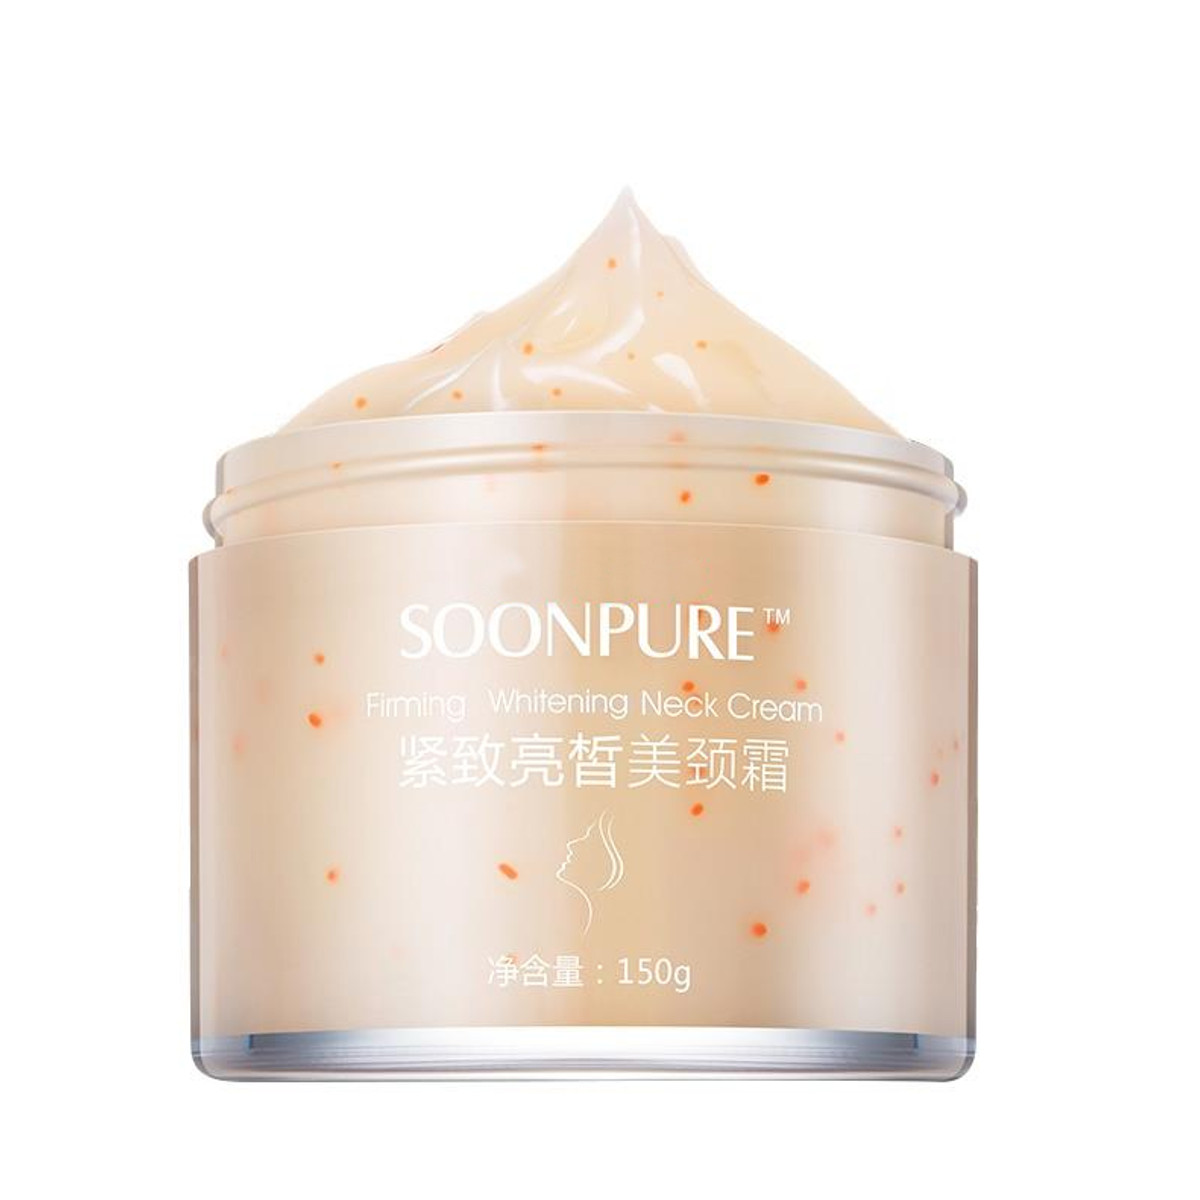 150g-Hyaluronic-acid-Collagen-Neck-Cream-Anti-Aging-Complexes-Whitening-Moisturizing-Firming-Skin-to-1437745